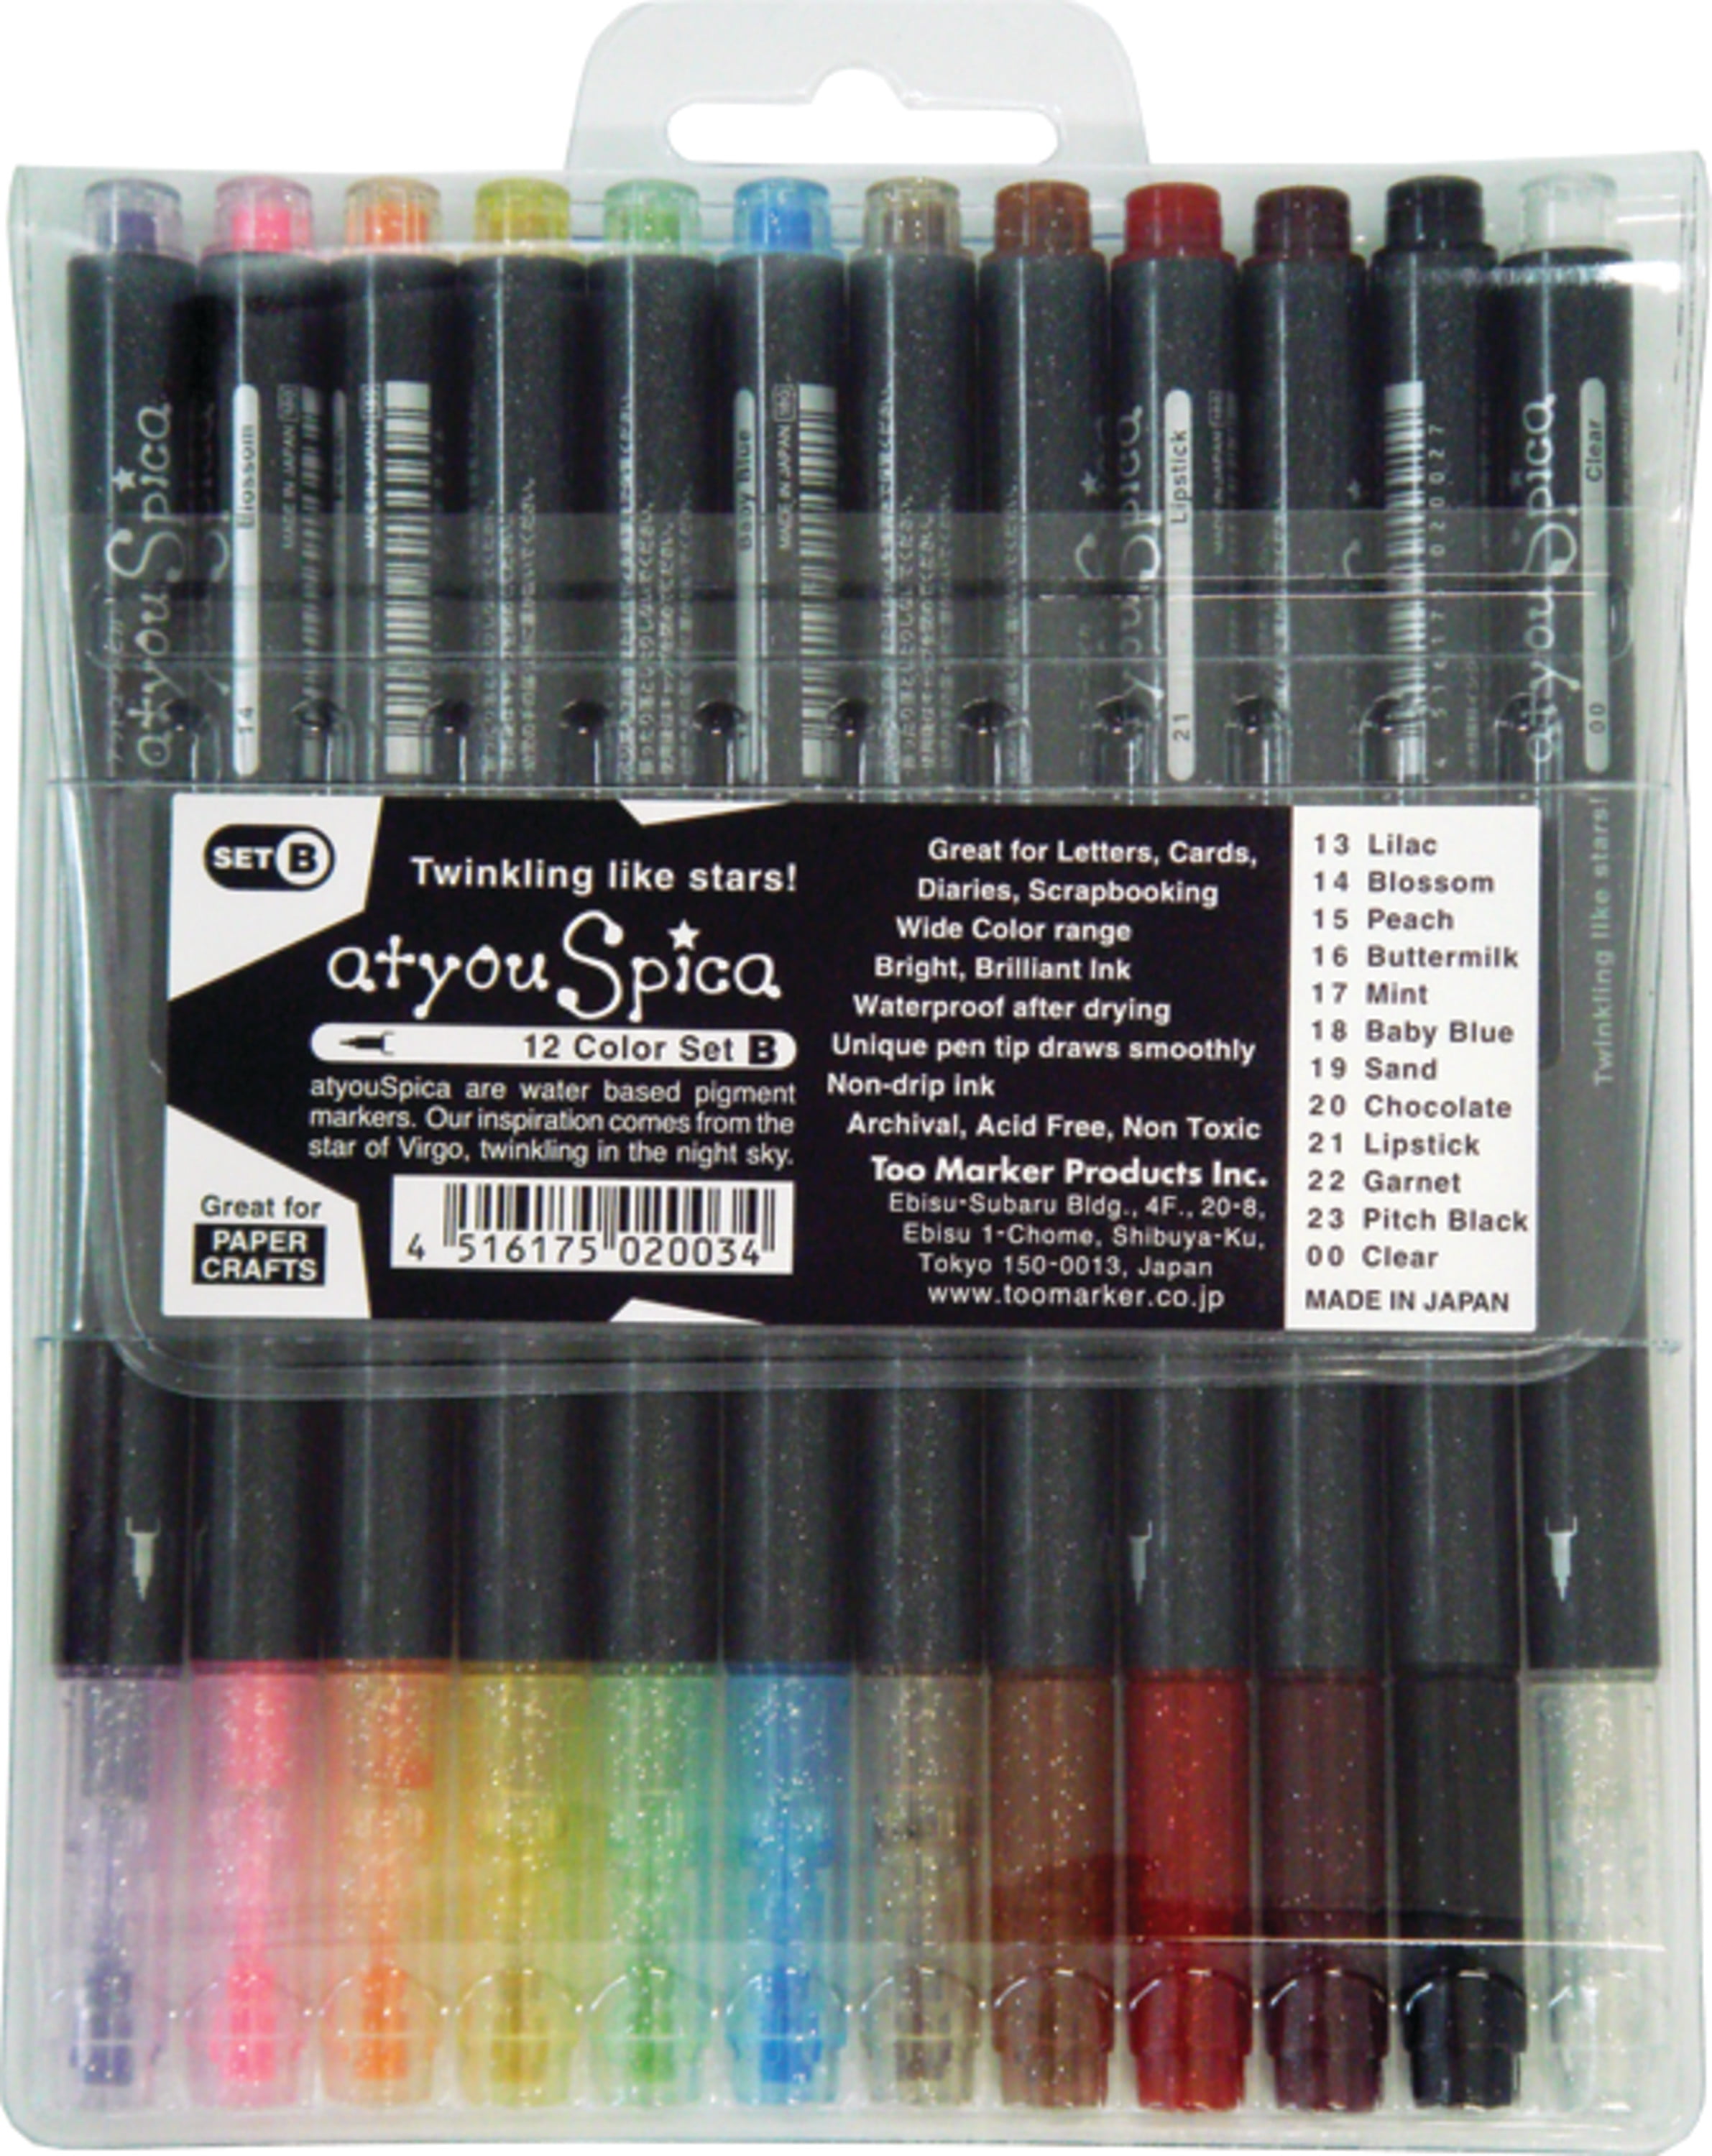 KINGART™ Glitter Markers, Set of 12 - The Good Toy Group